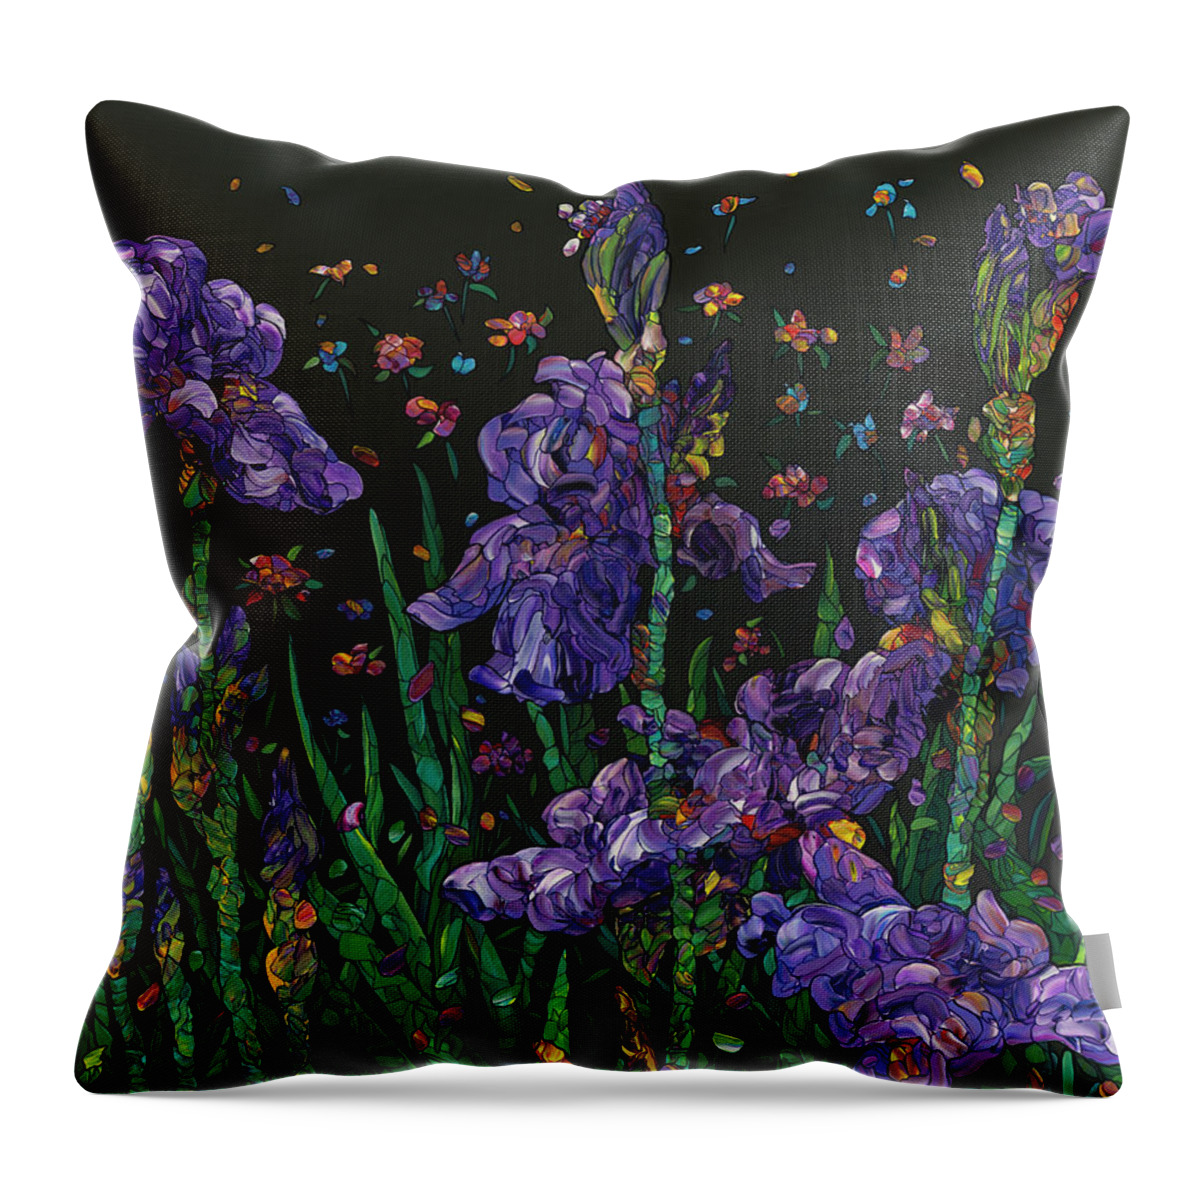 Flowers Throw Pillow featuring the painting Floral Interpretation - Irises by James W Johnson